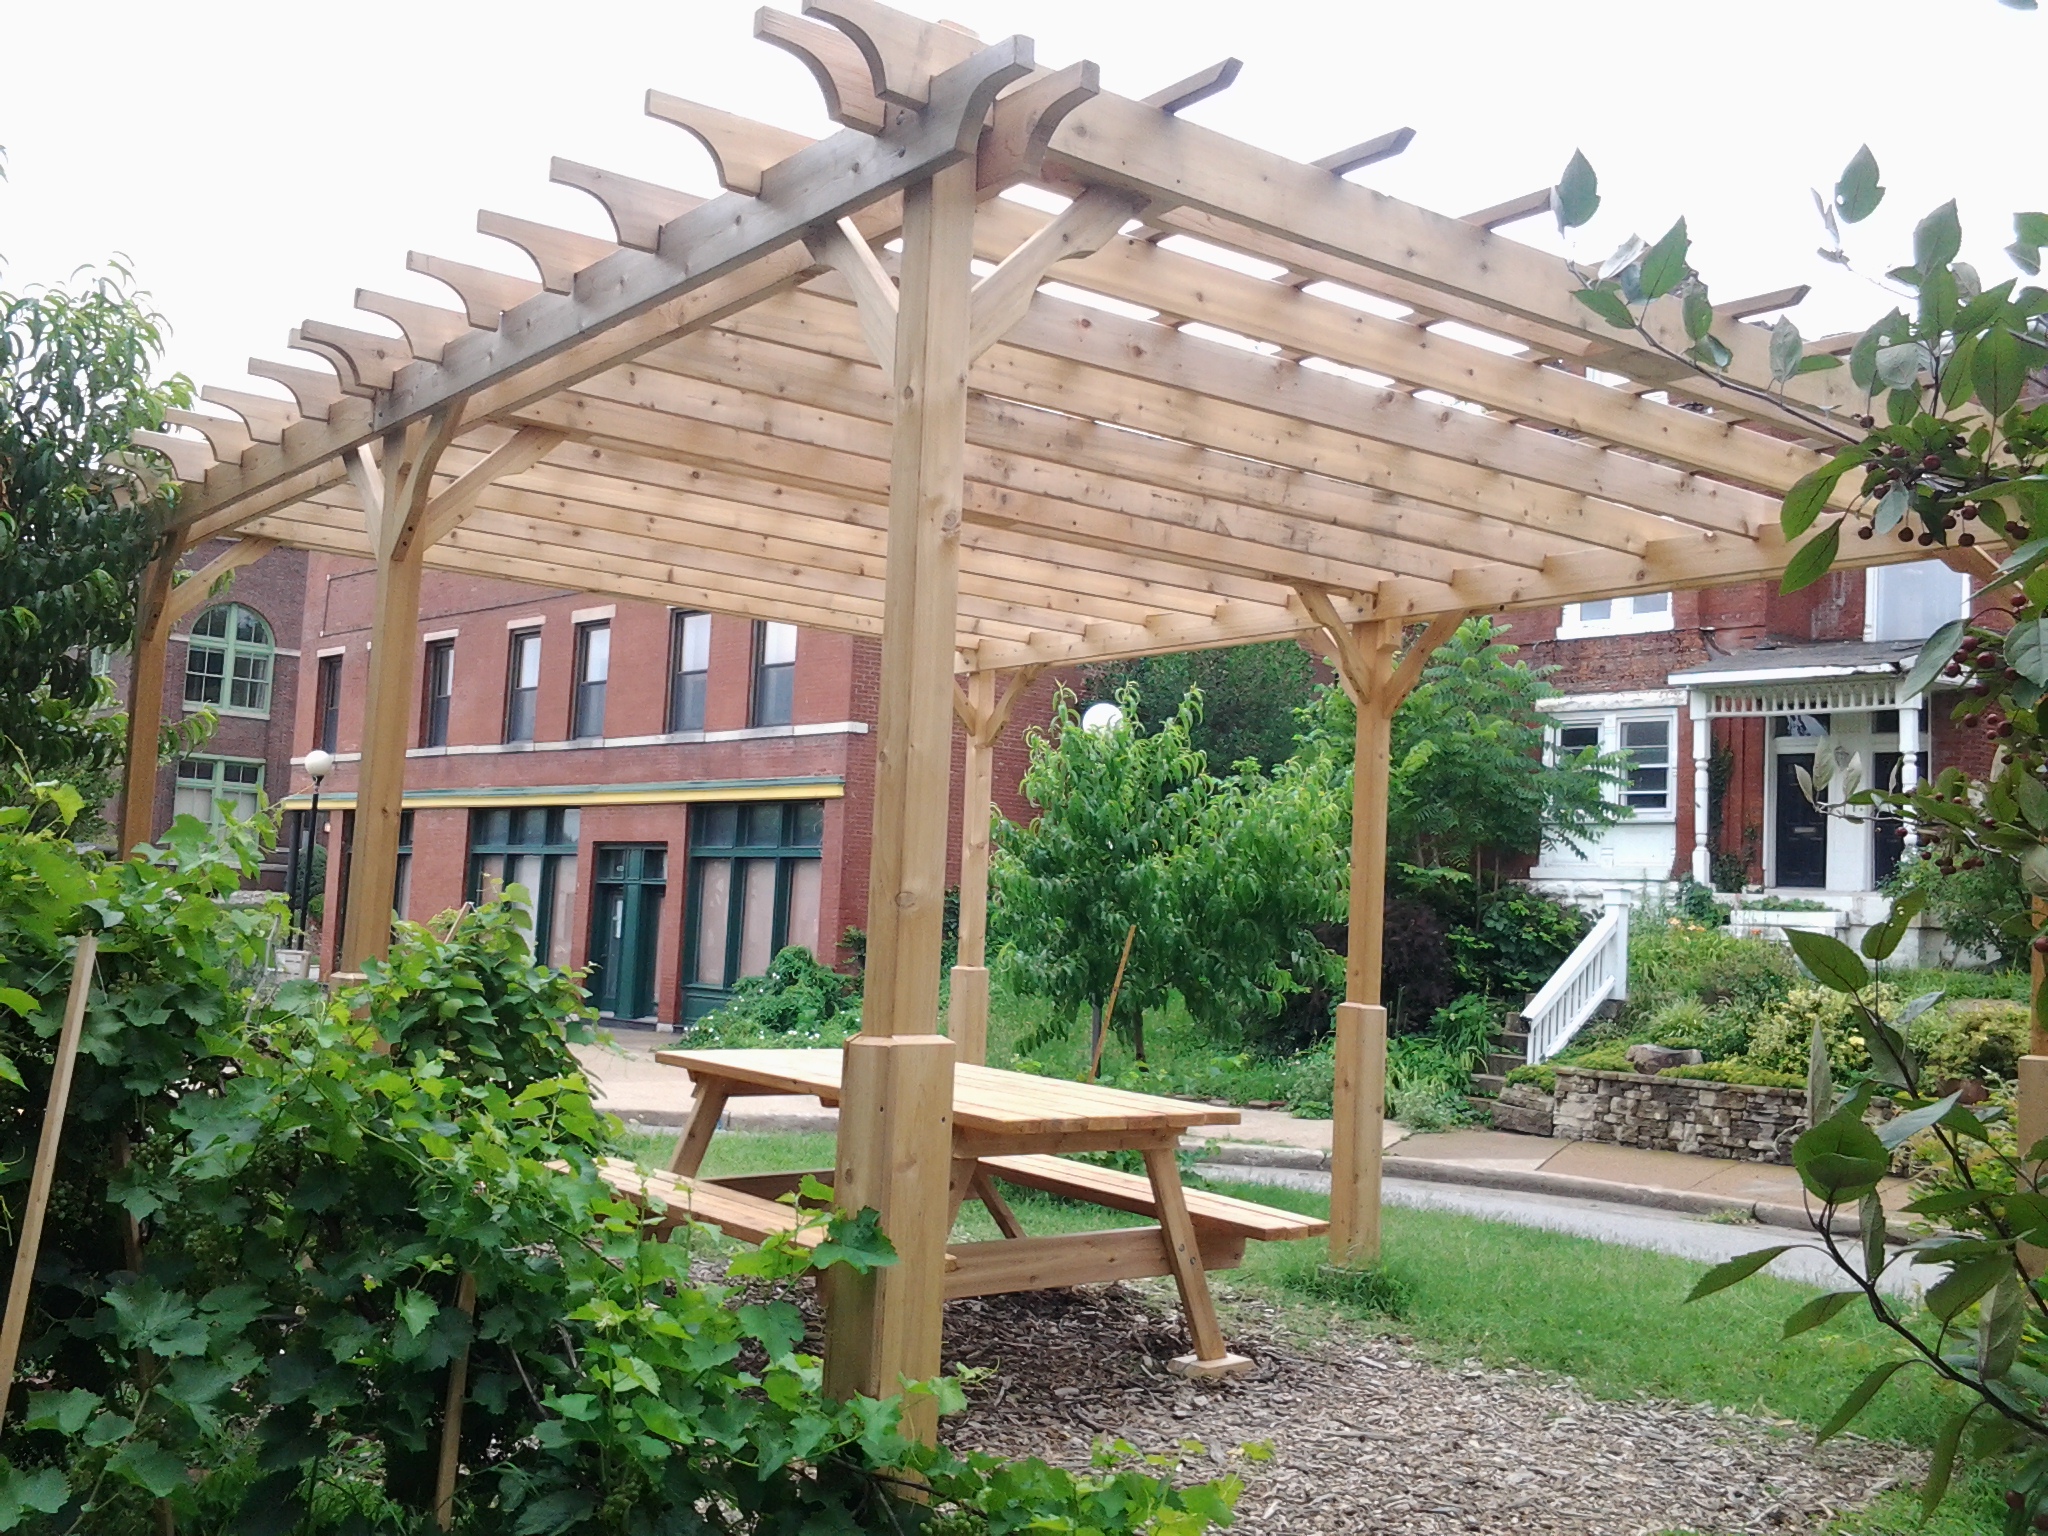 West Pine-Laclede Neighborhood Gets a New Pergola - West ...